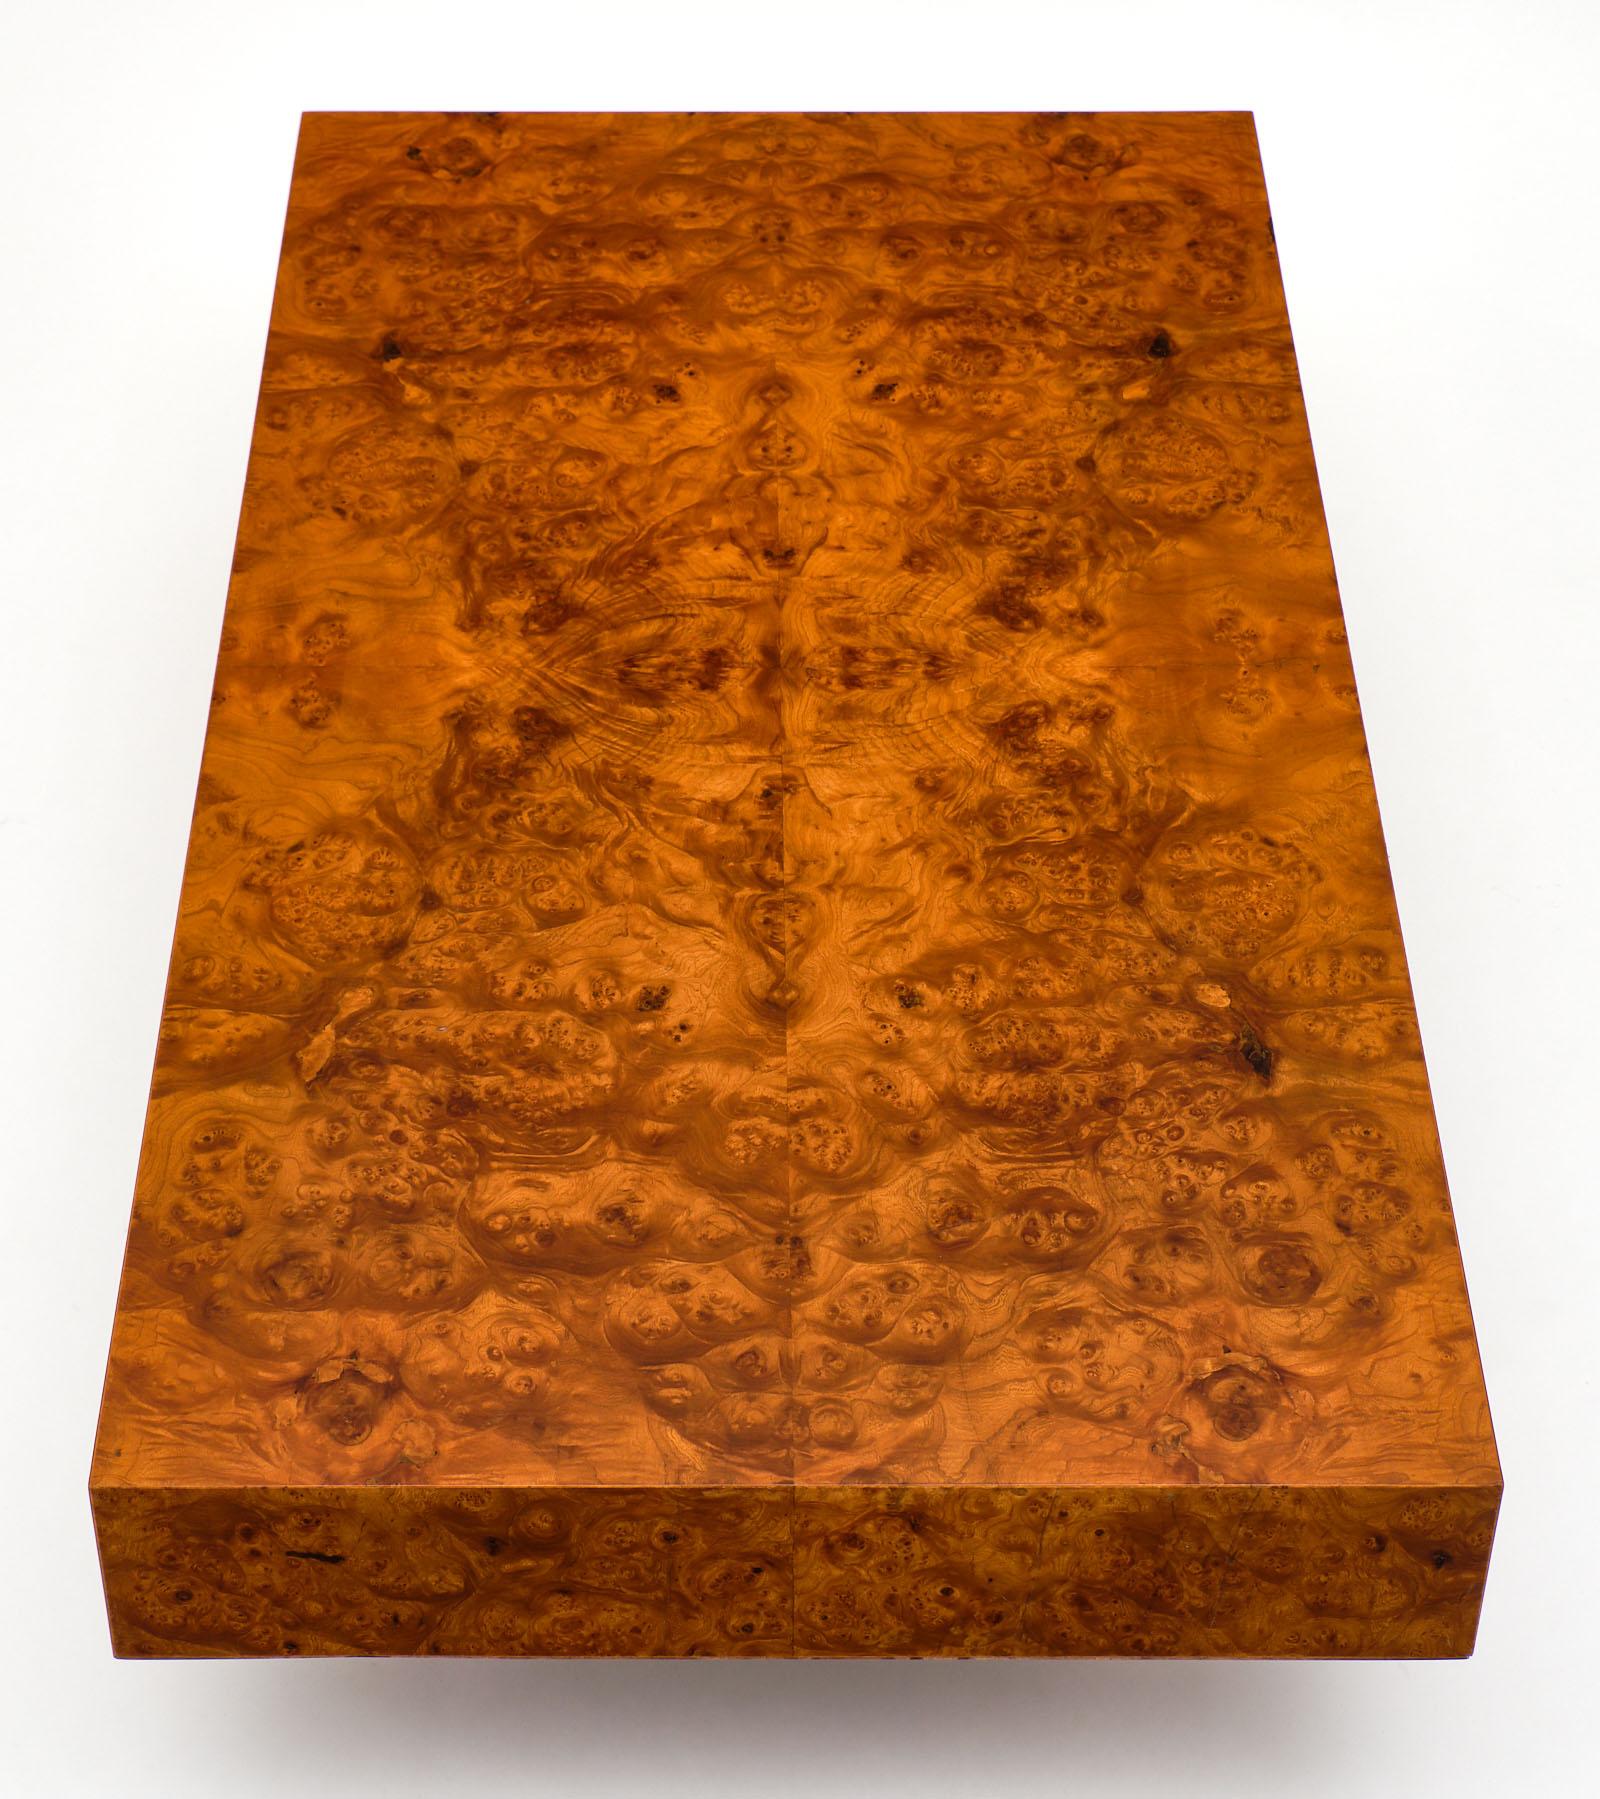 French Midcentury Burl Ash Coffee Table